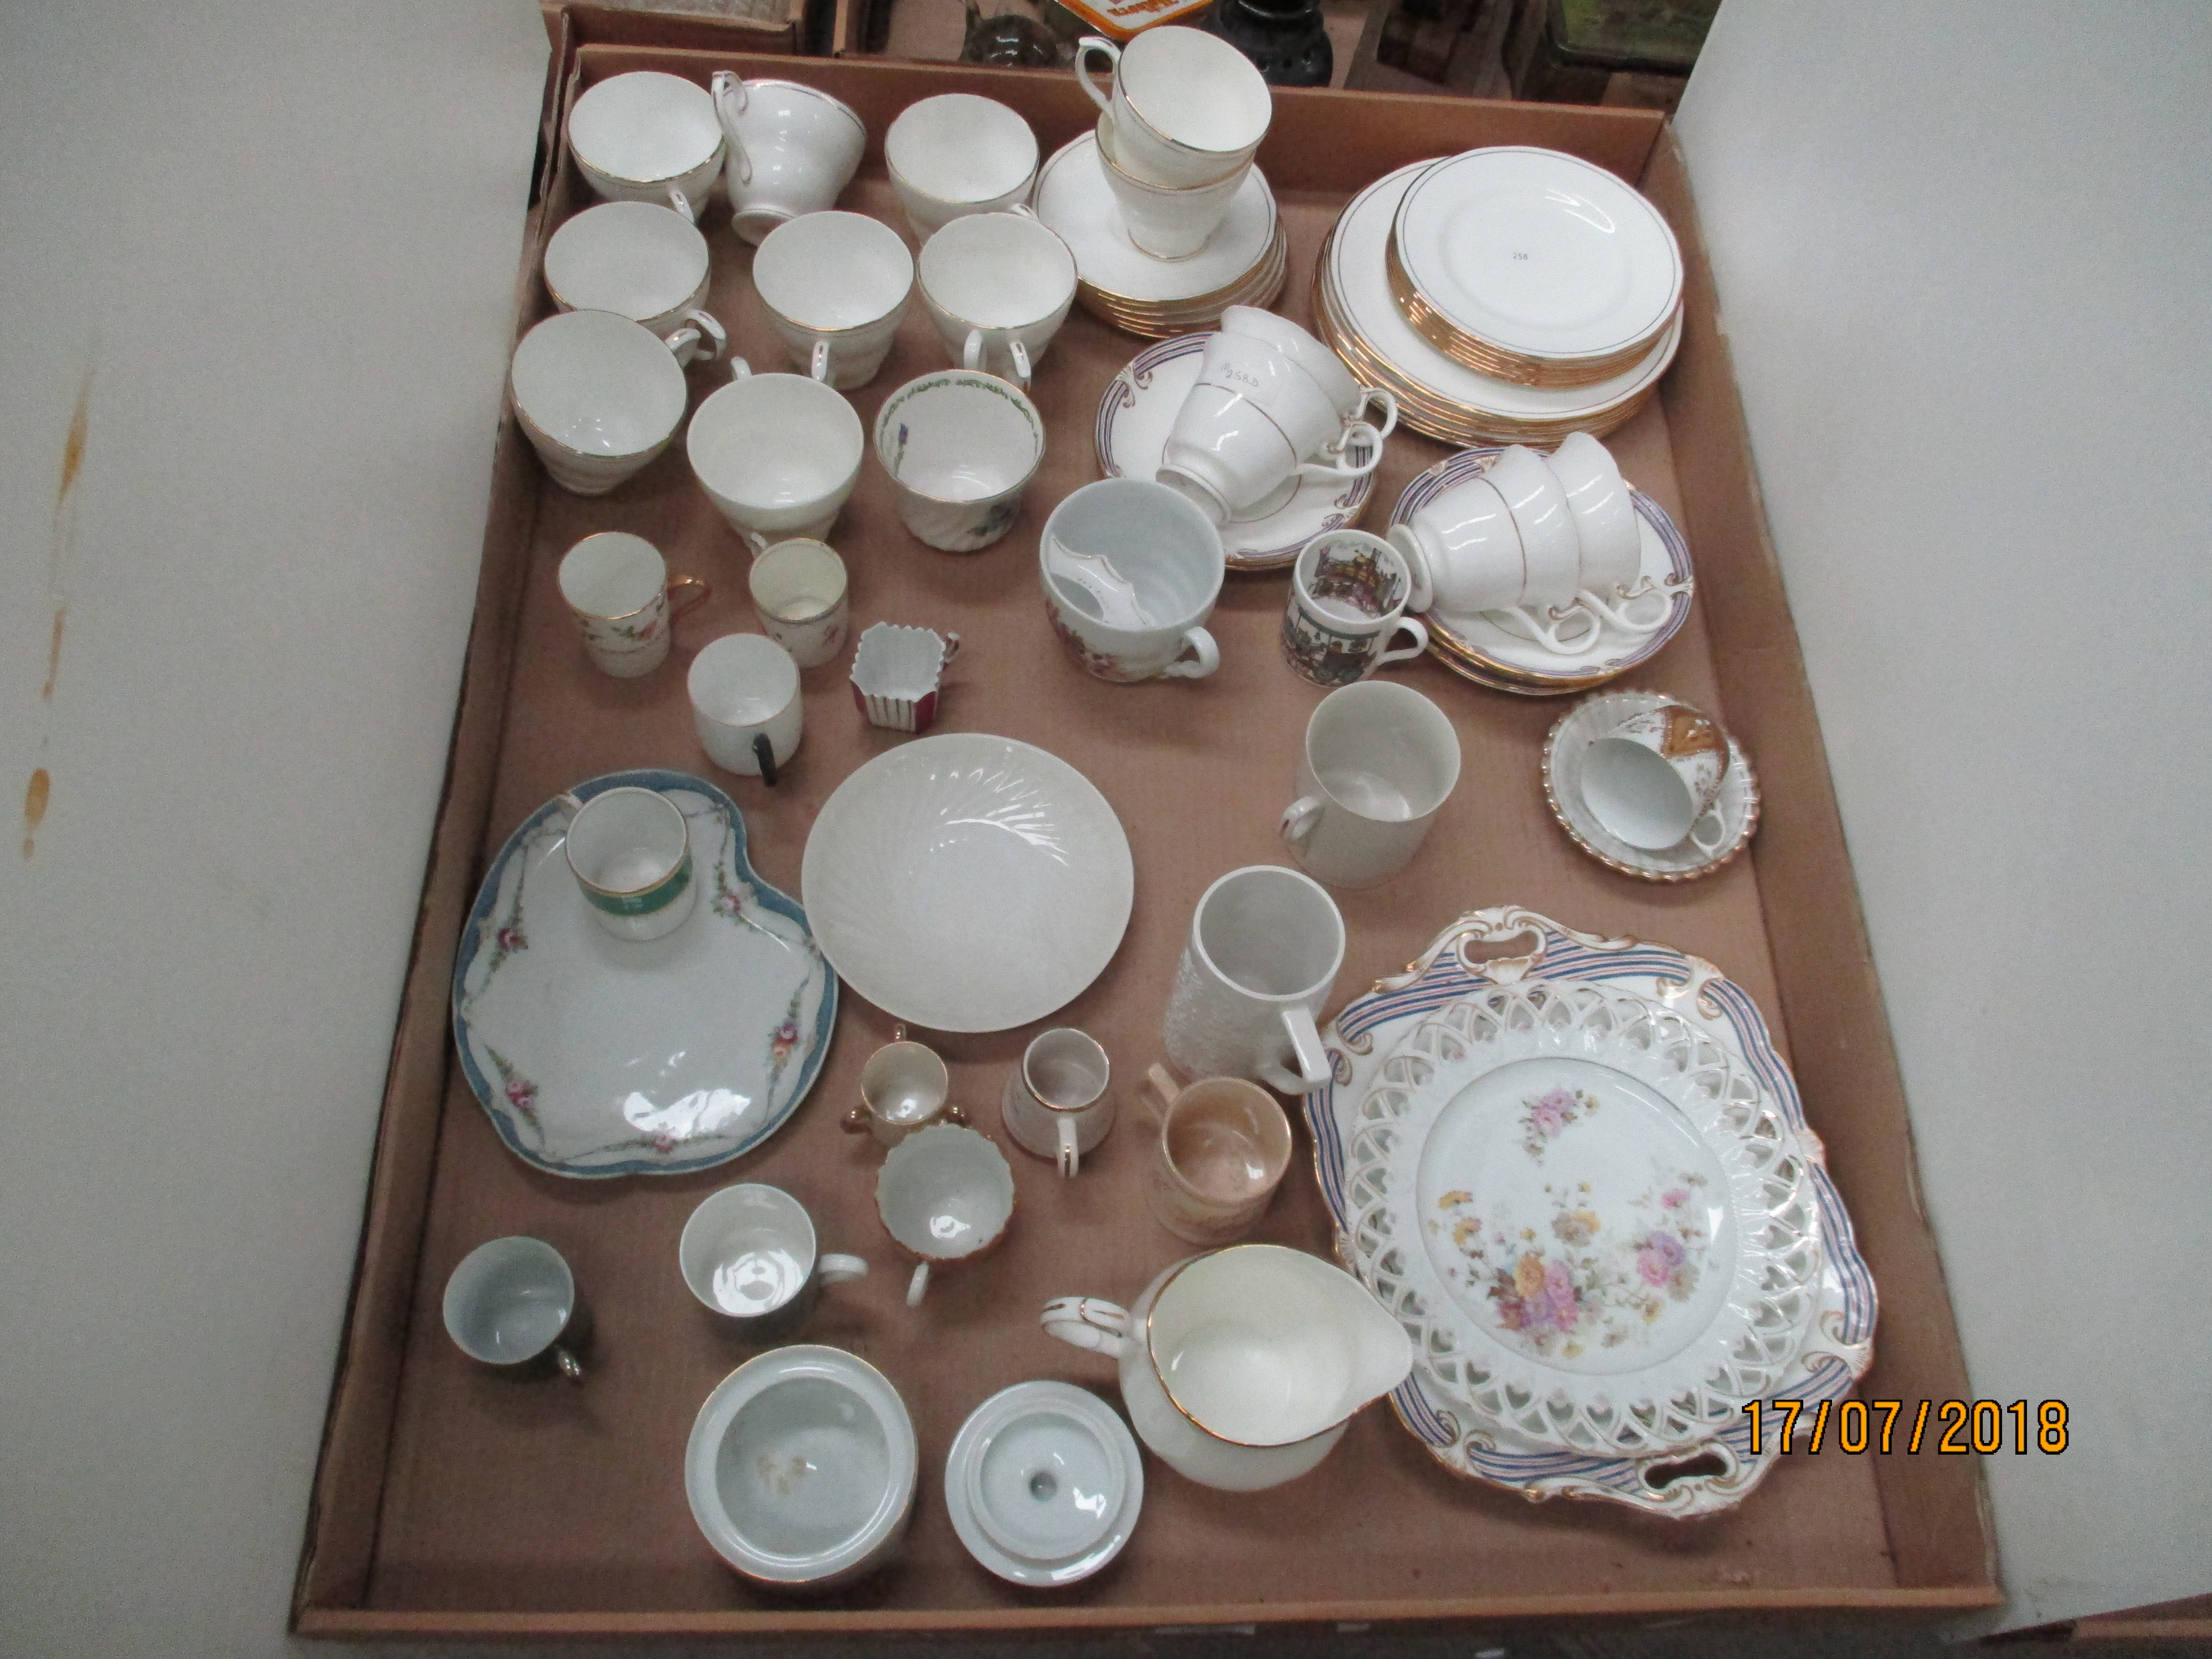 Contents to tray - decorative serving plates, Duchess cups and saucers, Wedgwood espresso cups,